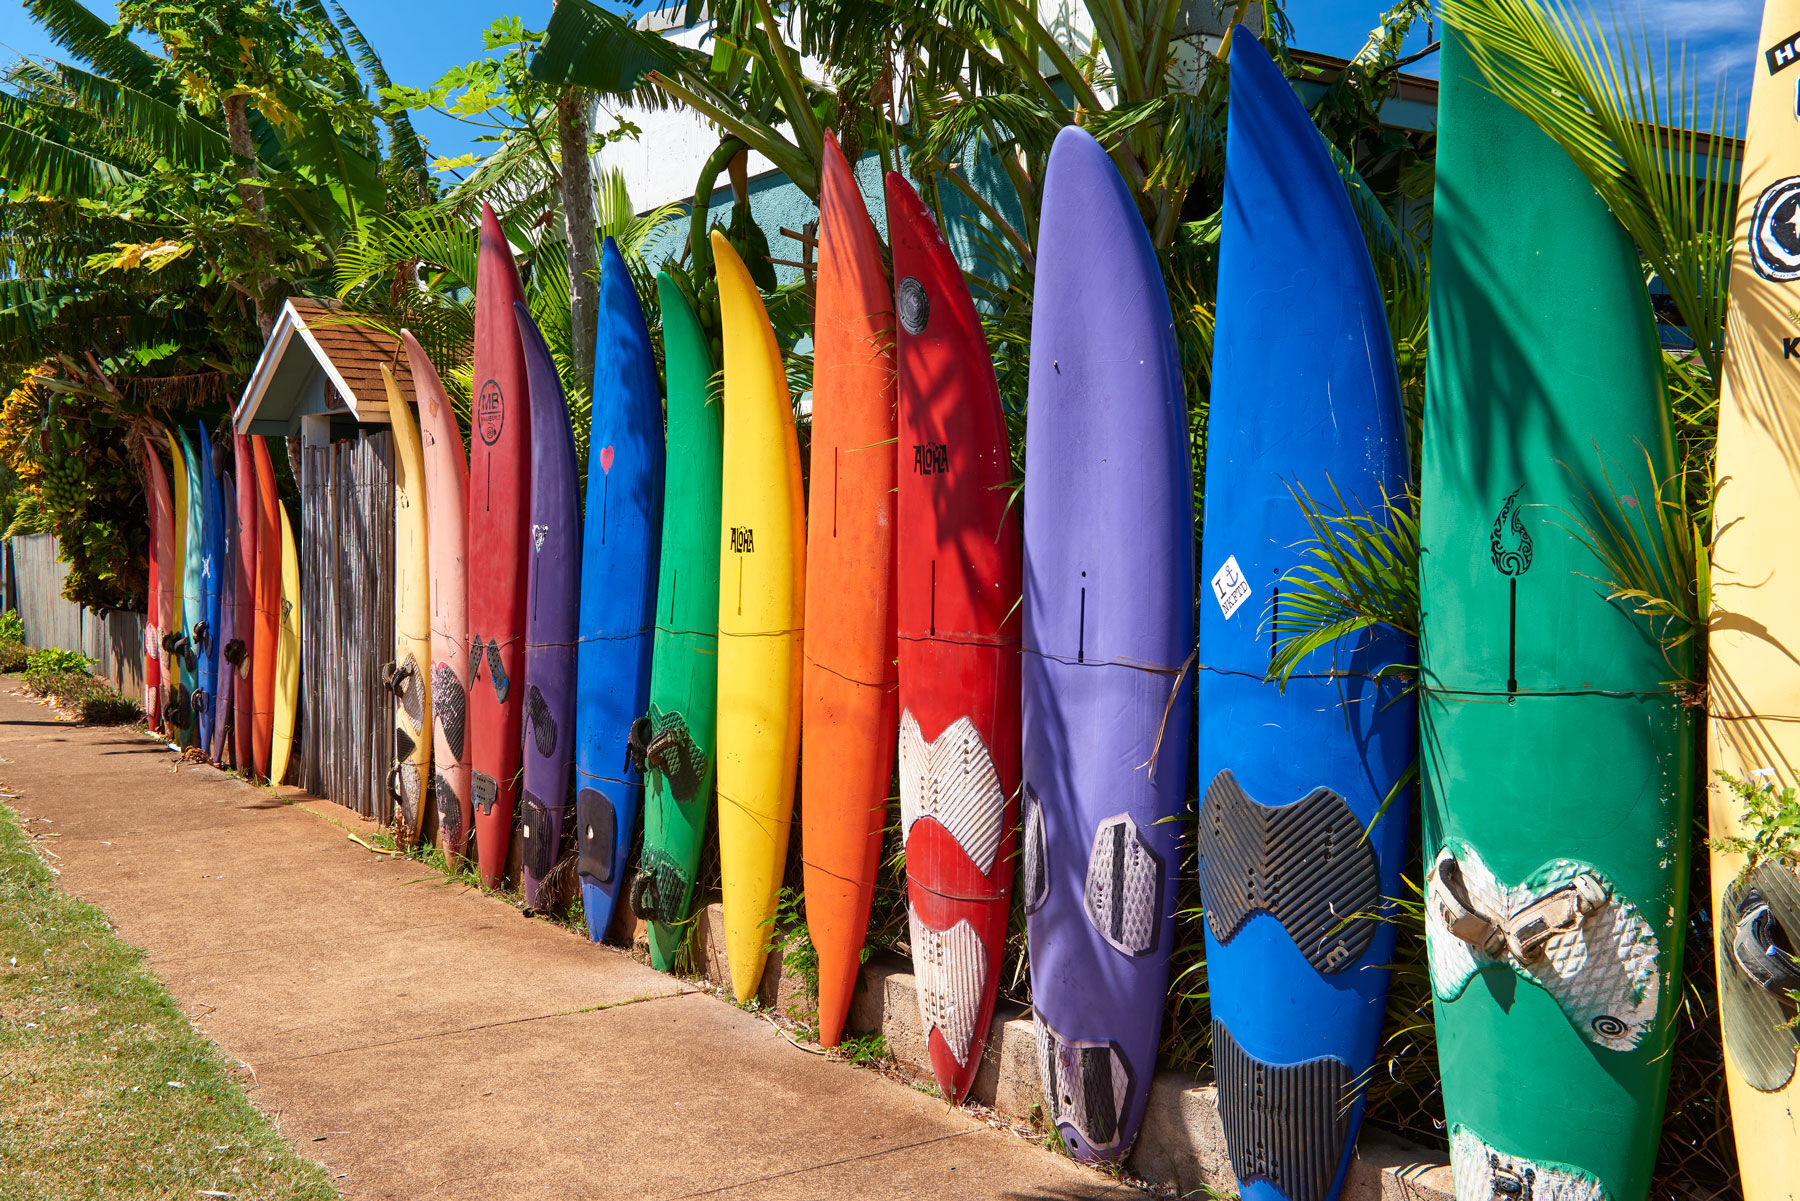 a photograph of a rainbow surfboard fence located in Paia on the island of Maui.  Photographed by Hawaii photographer Andrew Shoemaker